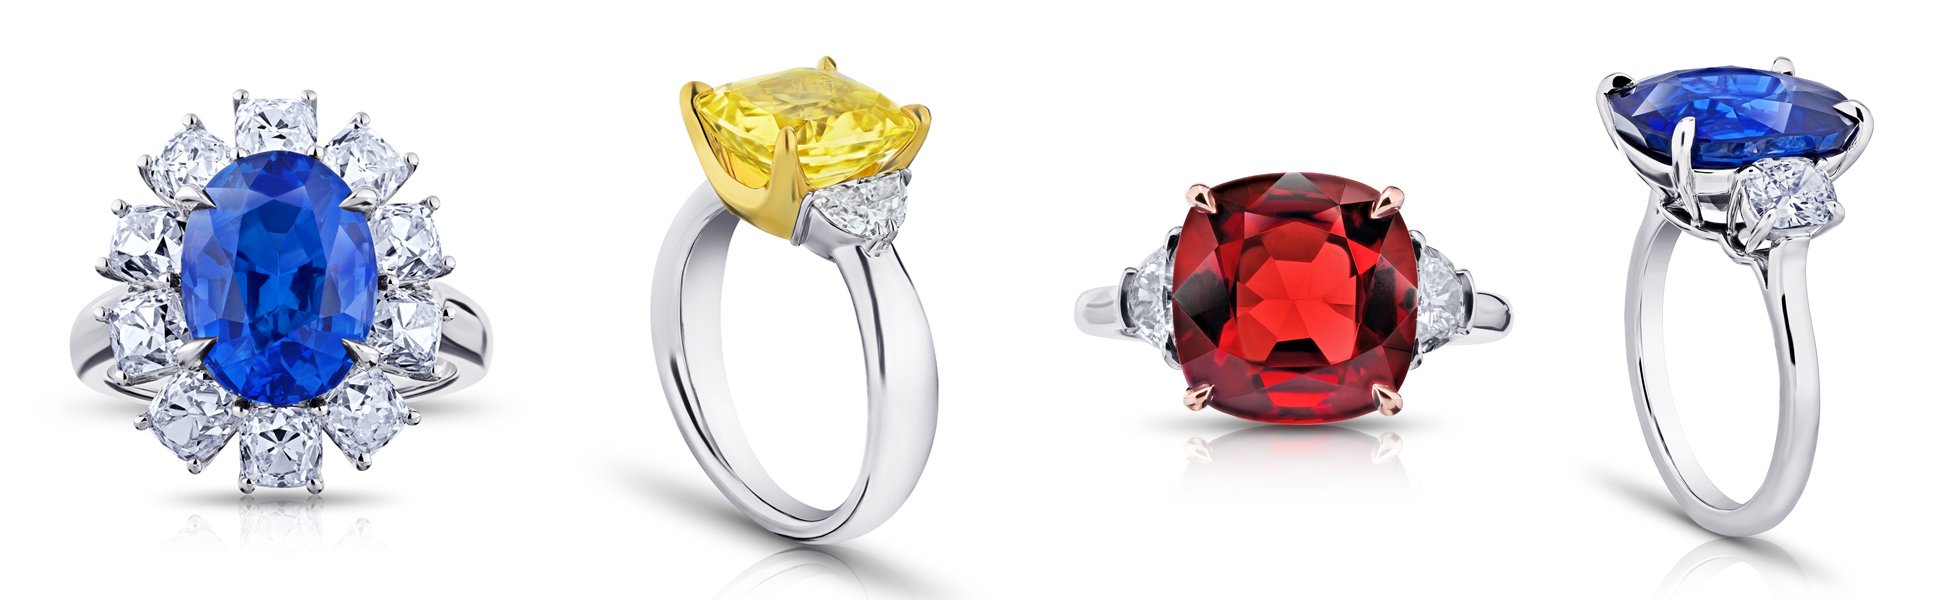 High Jewelry, An Exploration of Natural Colored Diamonds and Fine Gemstone Designs